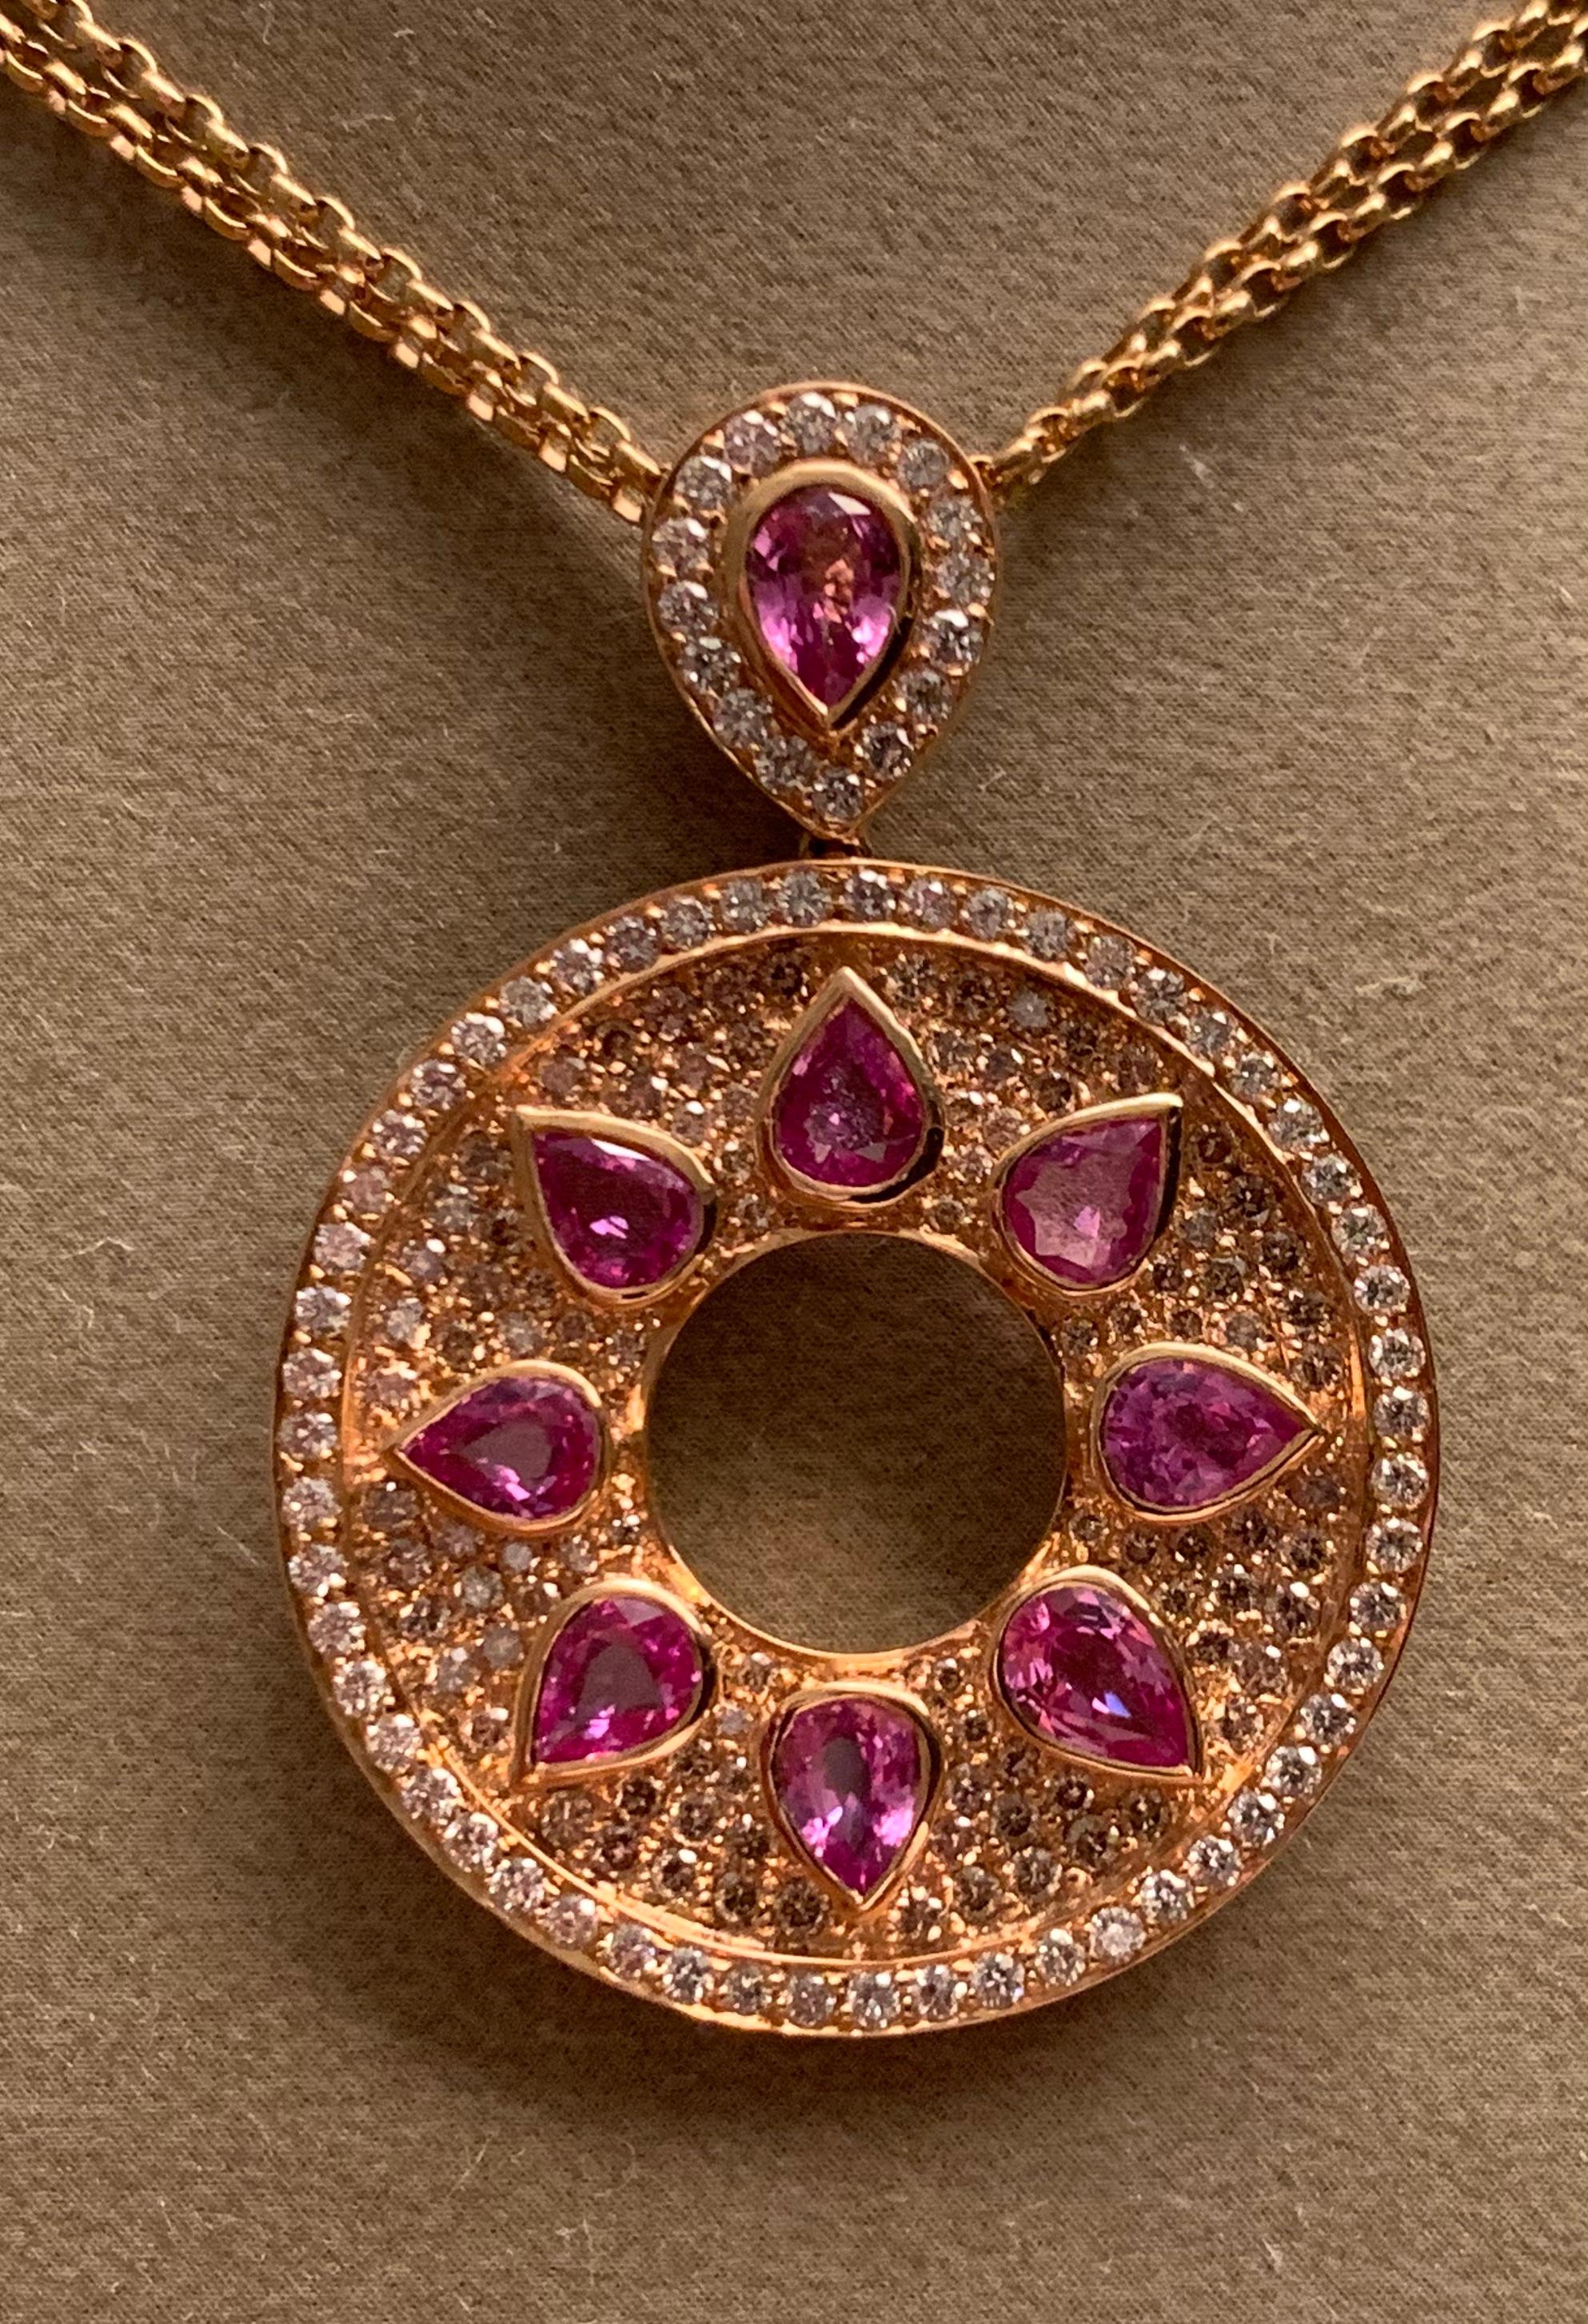 This fabulous 18k pink Gold pendant is set with 167 sparkling brown and white round brilliant cut diamonds that weigh 1.98 ct. The diamonds are accentuated by 9 lovely pear shape pink sapphires that weigh3.31 ct. The pendant, wich is detachable, 